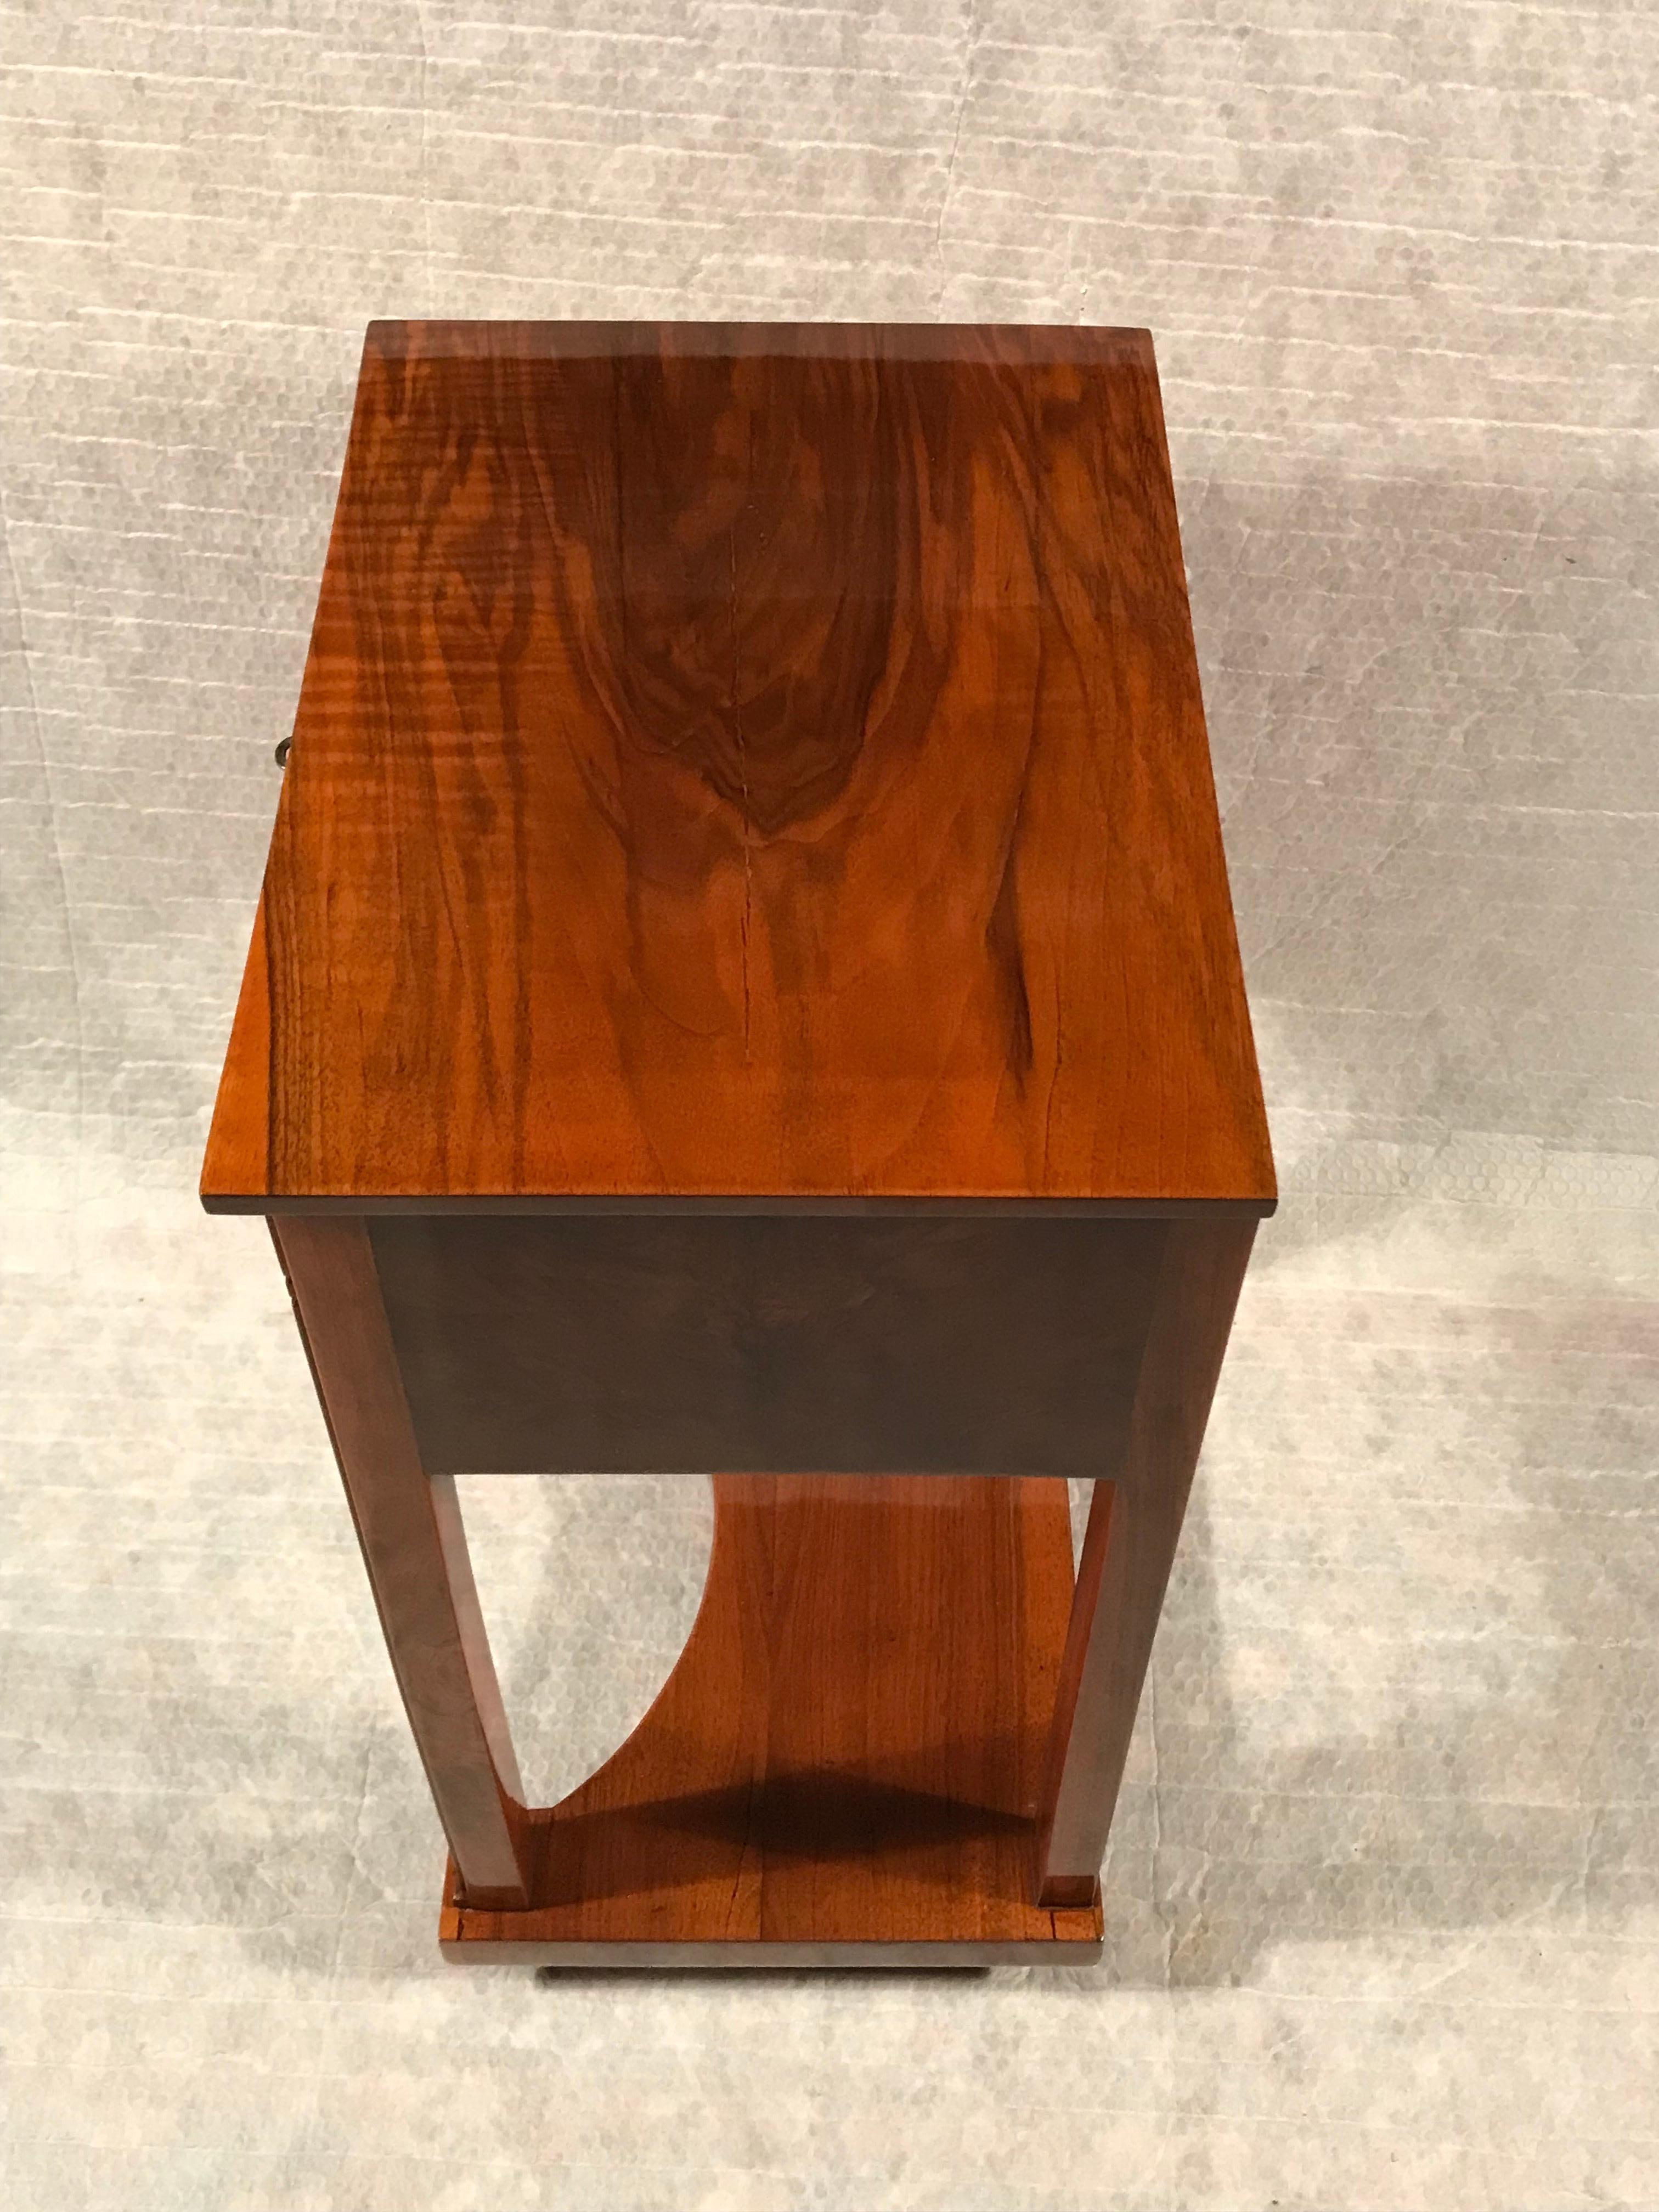 Biedermeier Sewing or Side Table, Germany, 1820, Walnut In Good Condition For Sale In Belmont, MA